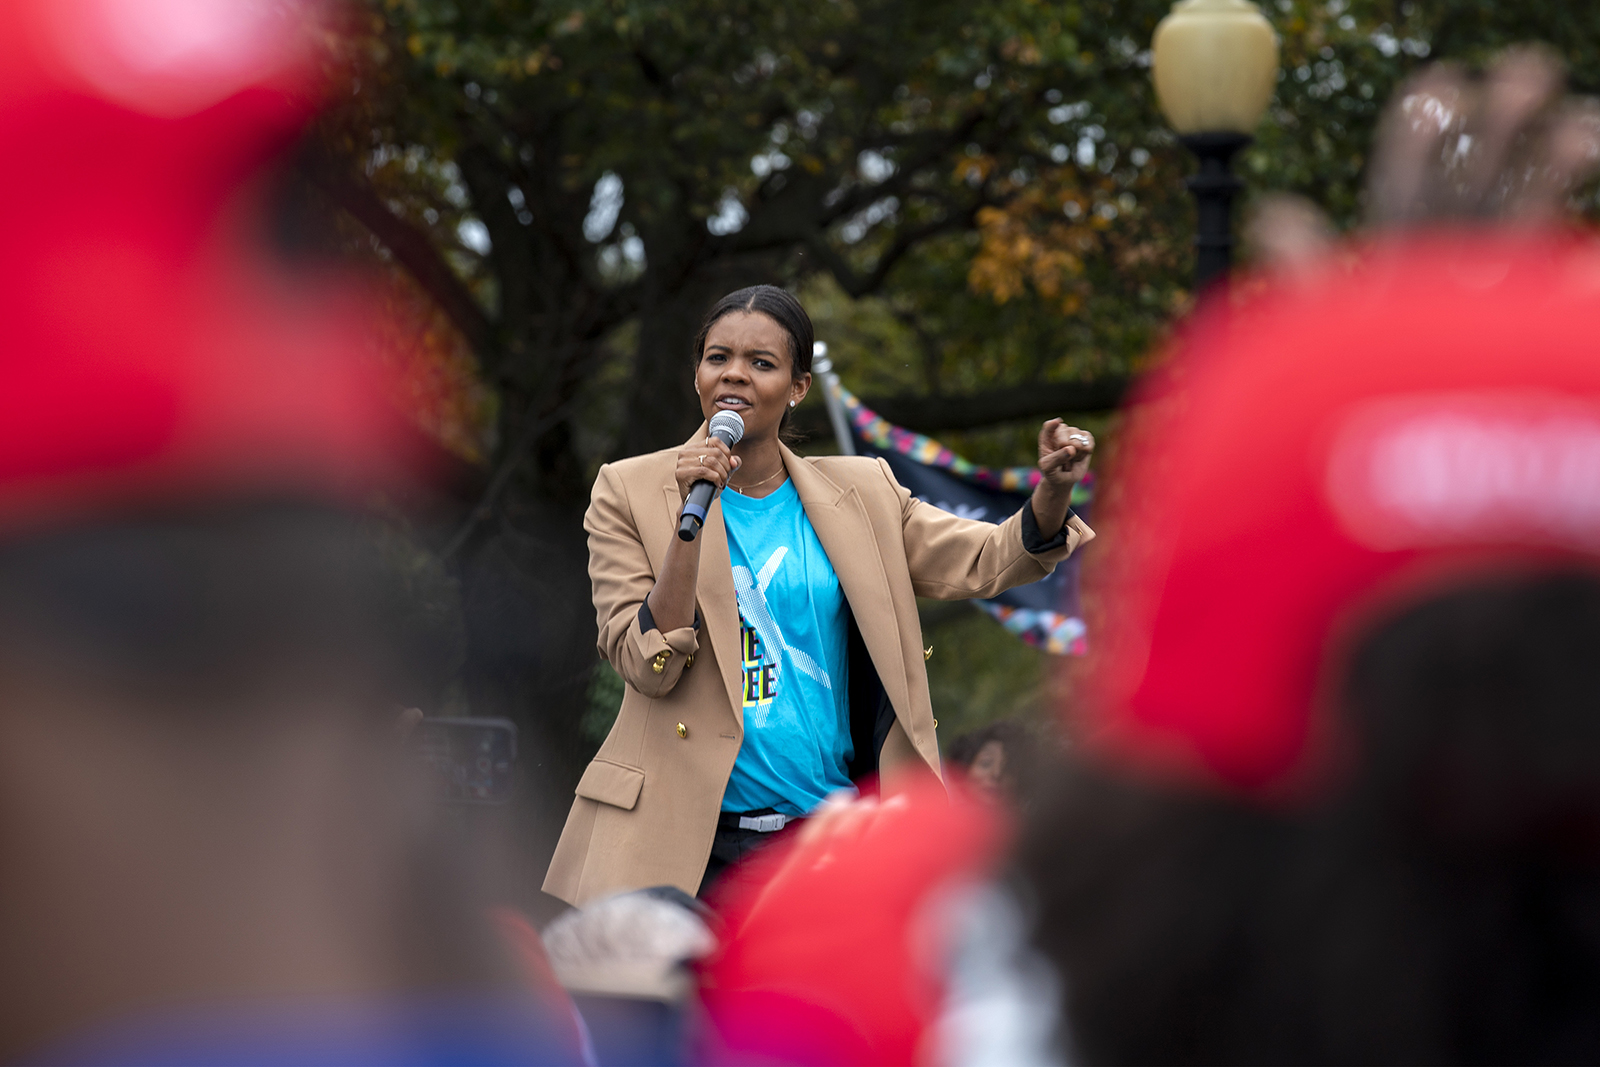 Conservative commentator and political activist Candace Owens in 2020.  speaks during a rally about the Ellipse at the White House on Saturday, October 10, in Washington.  (AP Photo/Jose Luis Magana)